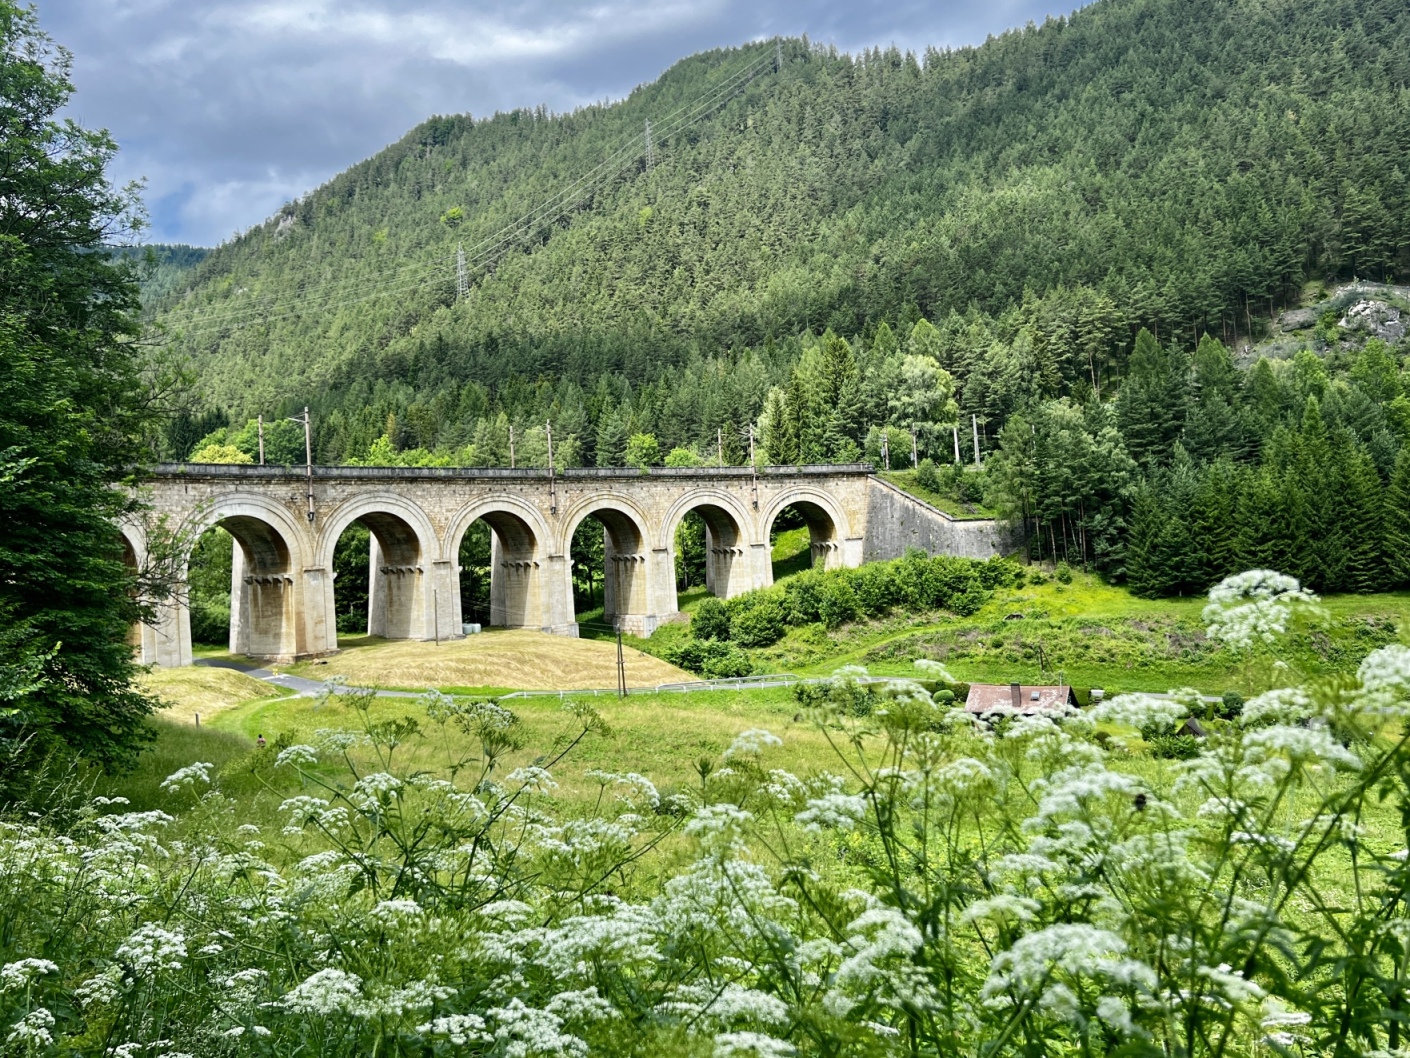 A scenic view of the historic stone viaduct with multiple arches spanning a grassy valley. Wildflowers grow in the foreground and thick green forests cover the surrounding hills. Cloudy skies contrast with the greenery on this scenic Semmering Railway hike.